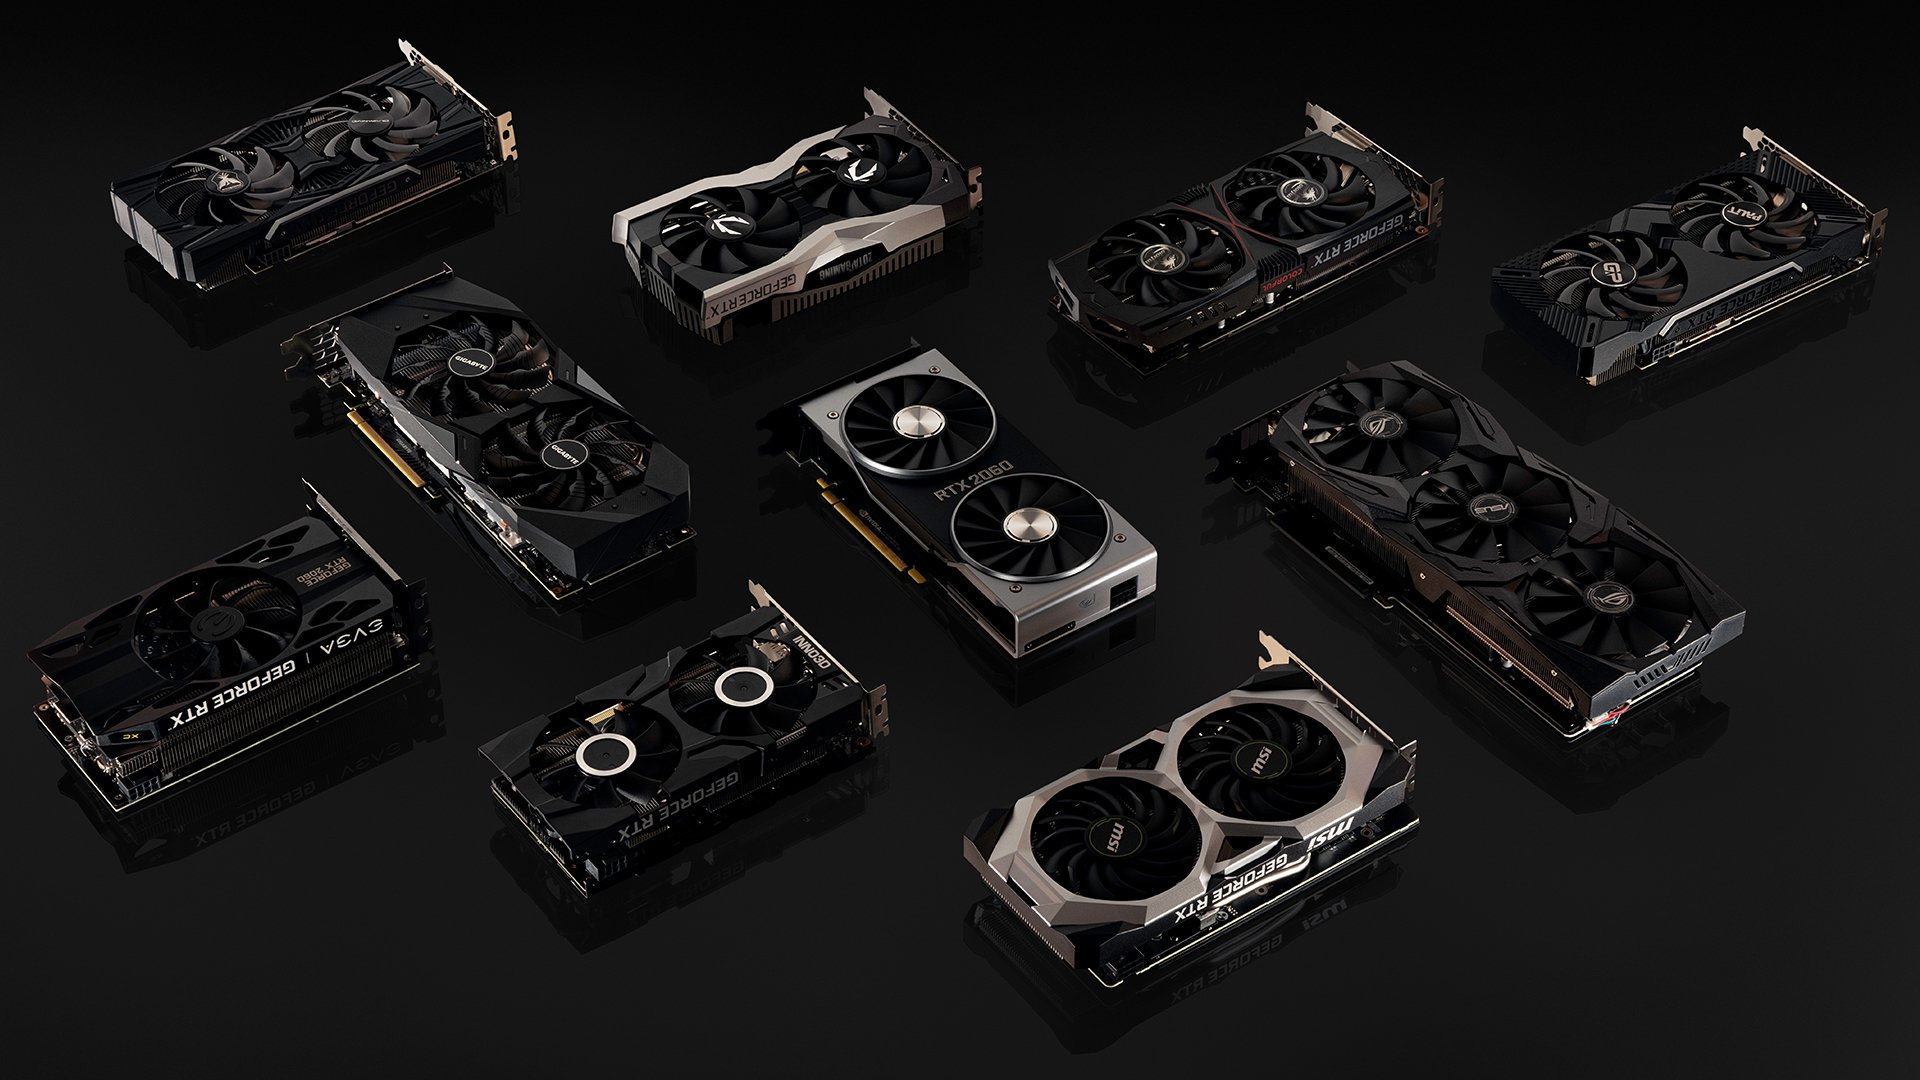 Best Graphics Cards (GPUs) for Gaming in 2020 | Windows Central